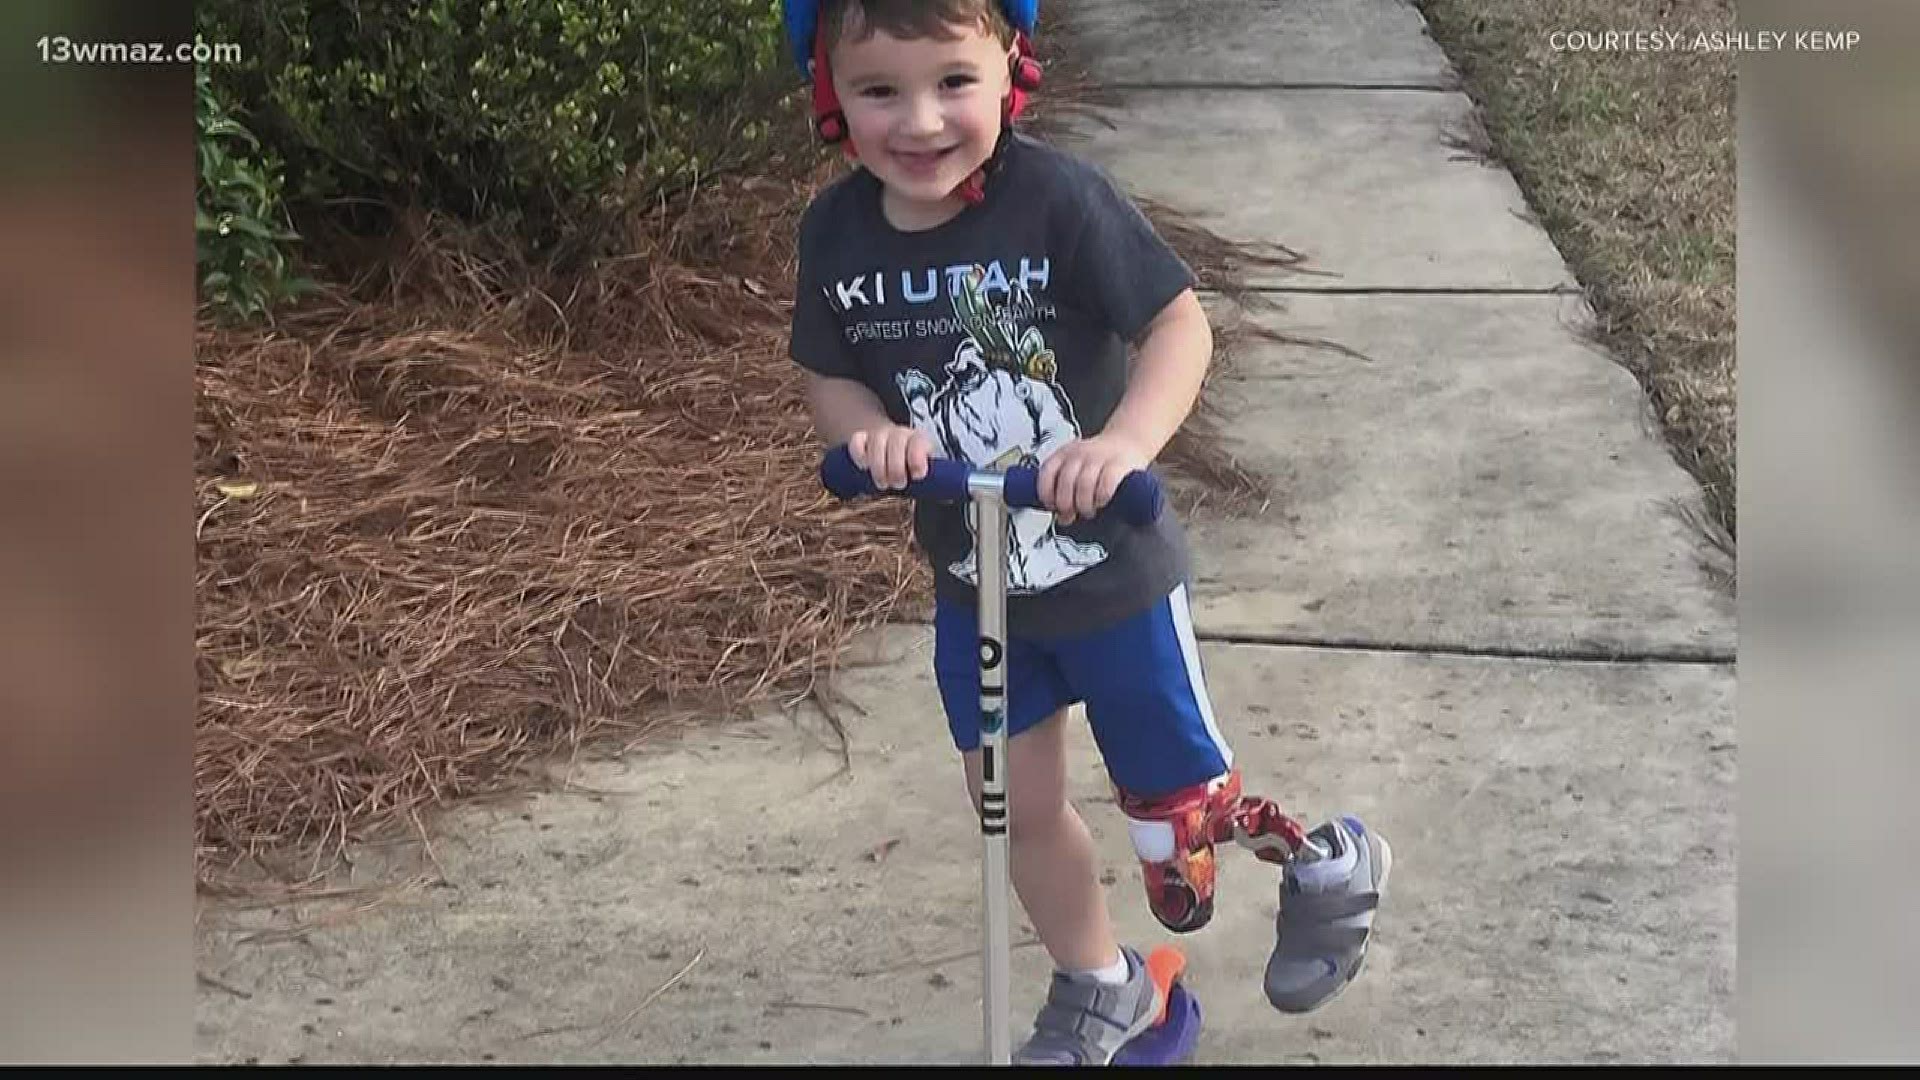 A Warner Robins youngster won't let his "little leg" slow him down. Sarah Hammond introduces us to 3-year-old Charlie Kemp.